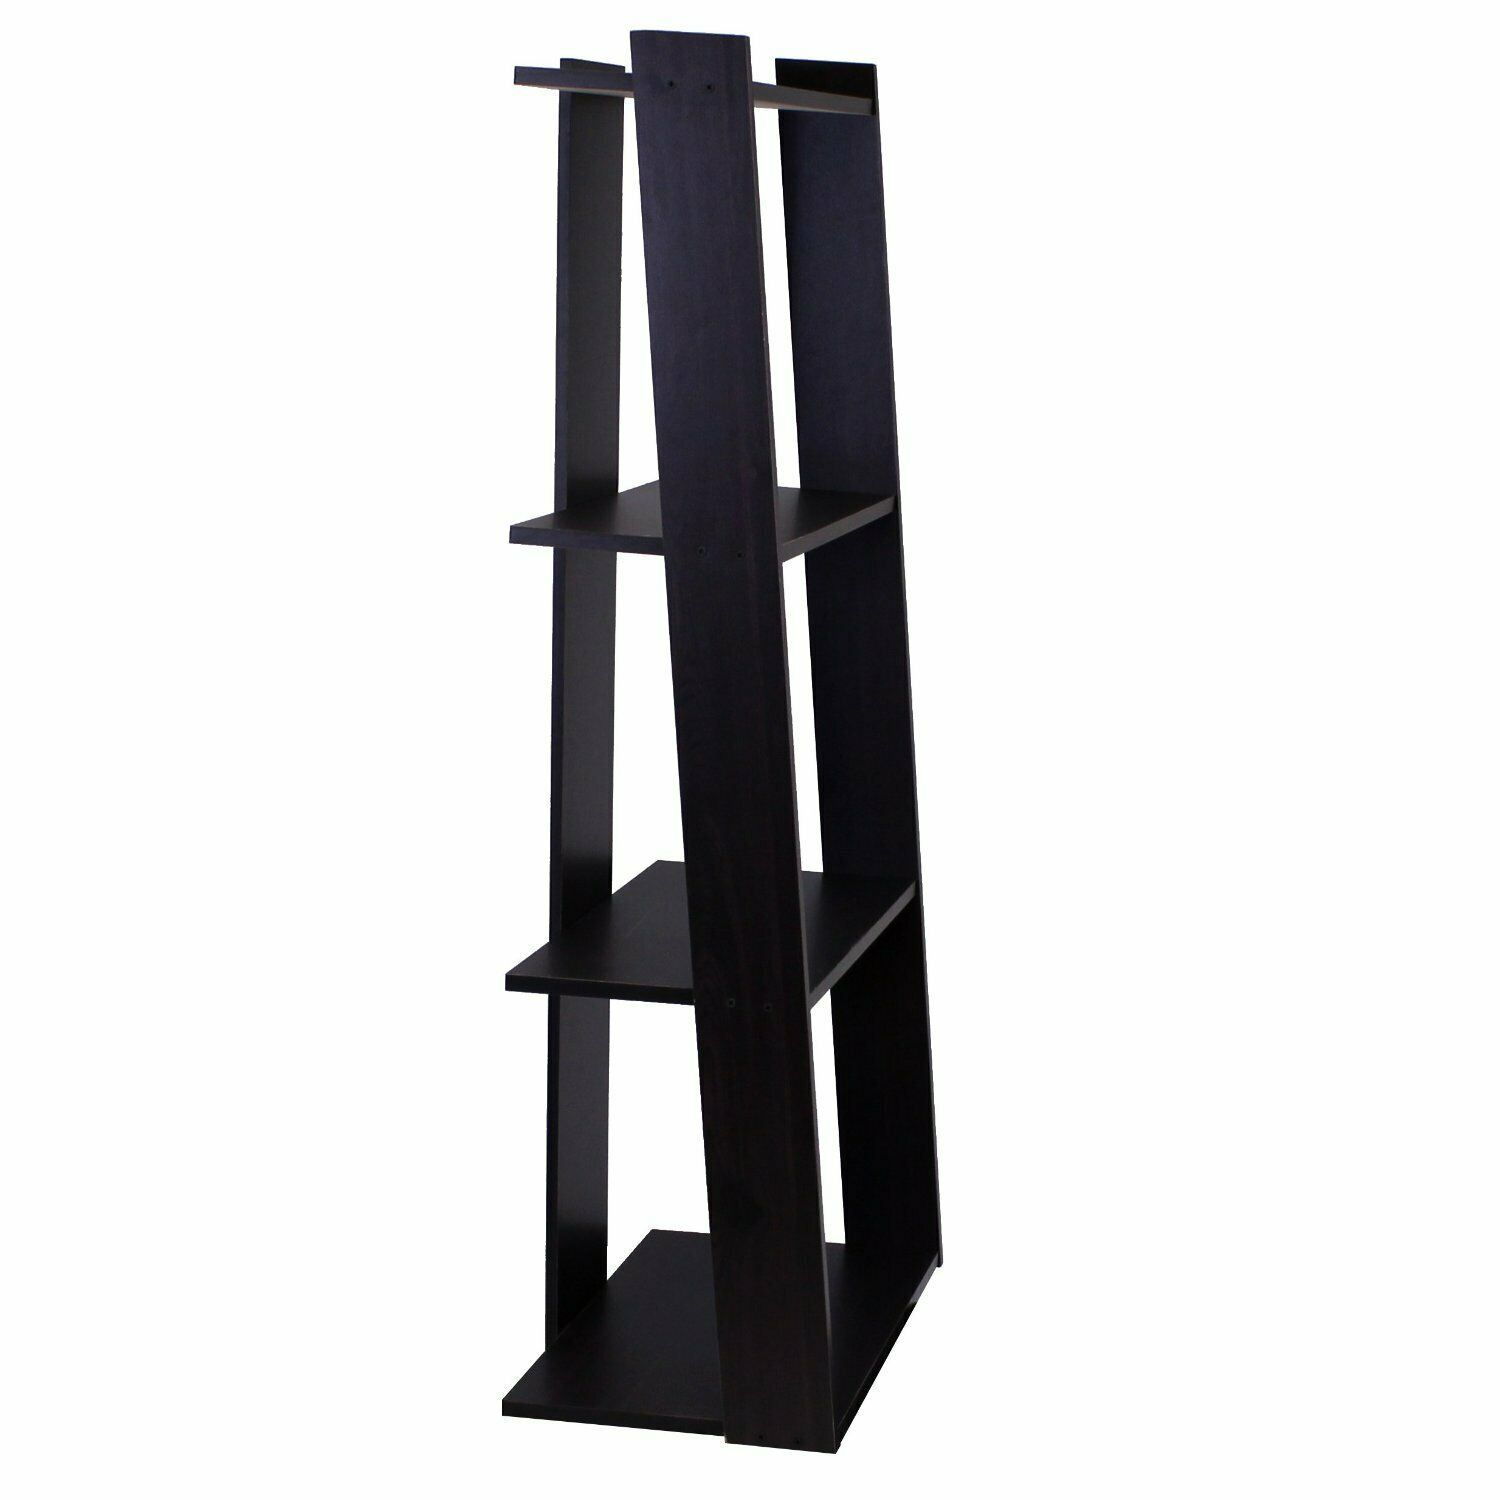 - Furinno Hidup Tropika ladder shelf is designed for space saving and modern stylish look.
- There is no foul smell of chemicals and this series of storage system is not the lightest in weight thus provide stability while placing on any elevated surface.
- Mix and match option uses wood dowel to connect each unit.
- The medium density composite wood is manufactured in Malaysia and comply with the green rules of production.
- Please contact us for missing parts, damaged goods, or other questions, we are pleased to send you the replacement part free of charge.
Care instructions: wipe clean with clean damped cloth. Avoid using harsh chemicals. Pictures are for illustration purpose. All decor items are not included in this offer.